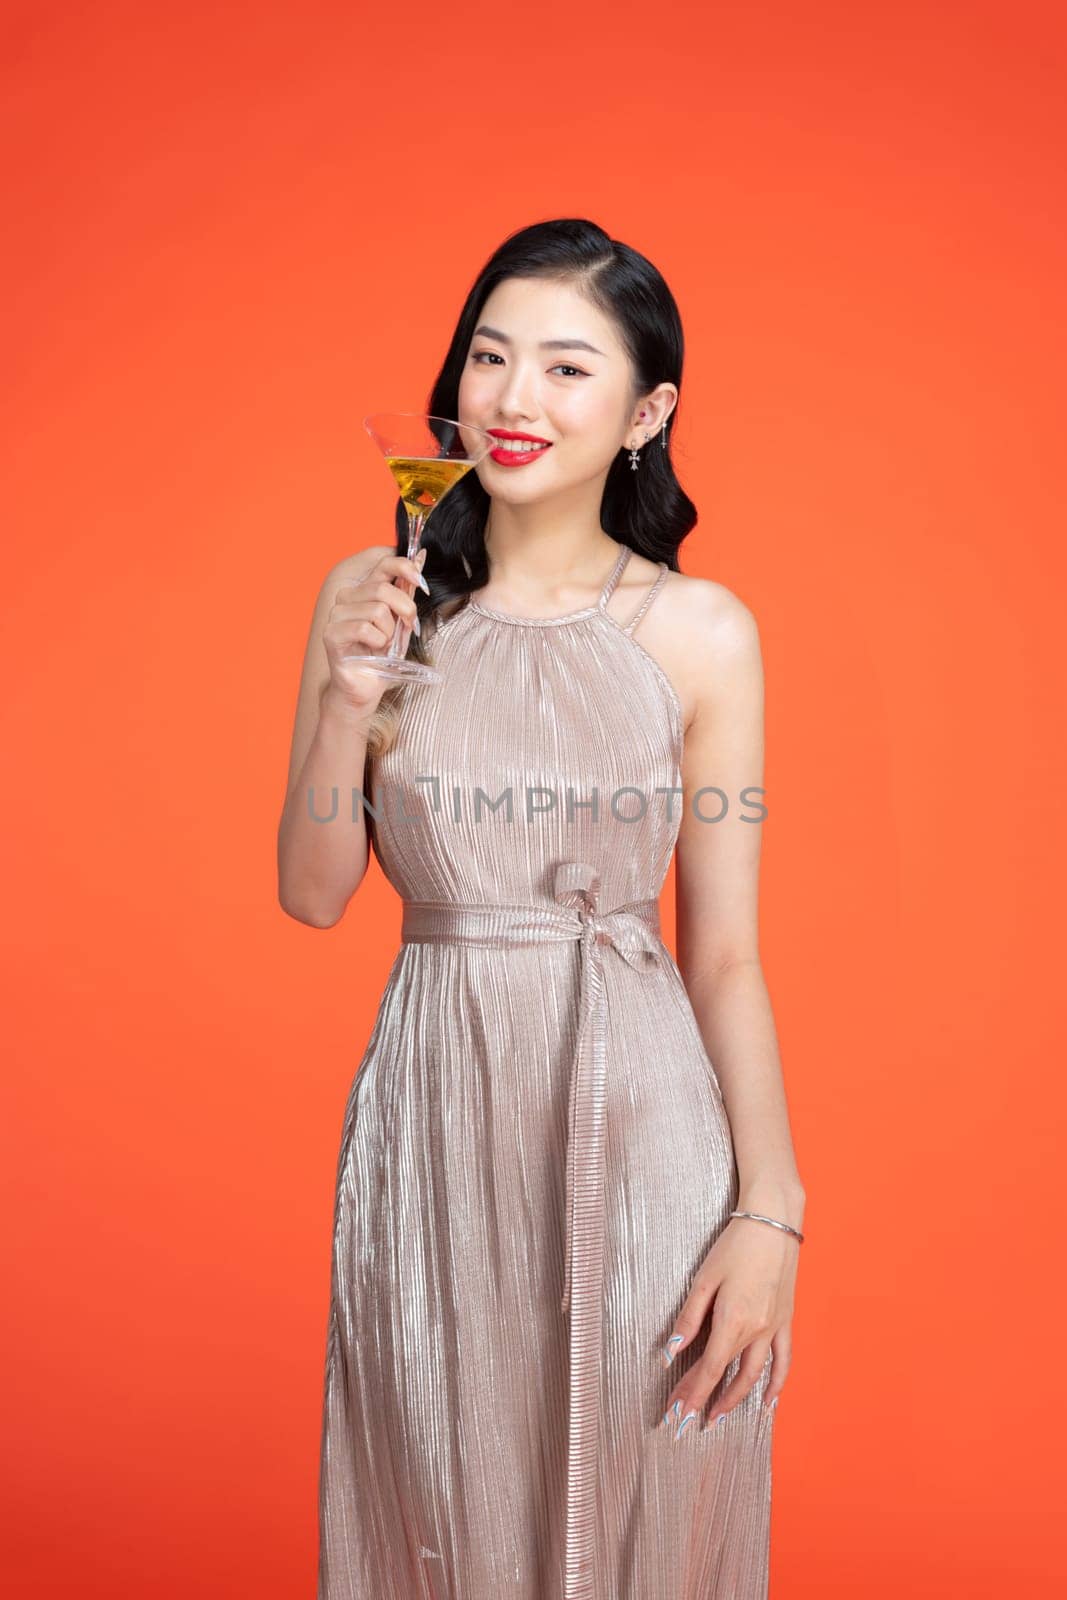 Woman, portrait smile and glass champagne standing in stylish fashion isolated on red background